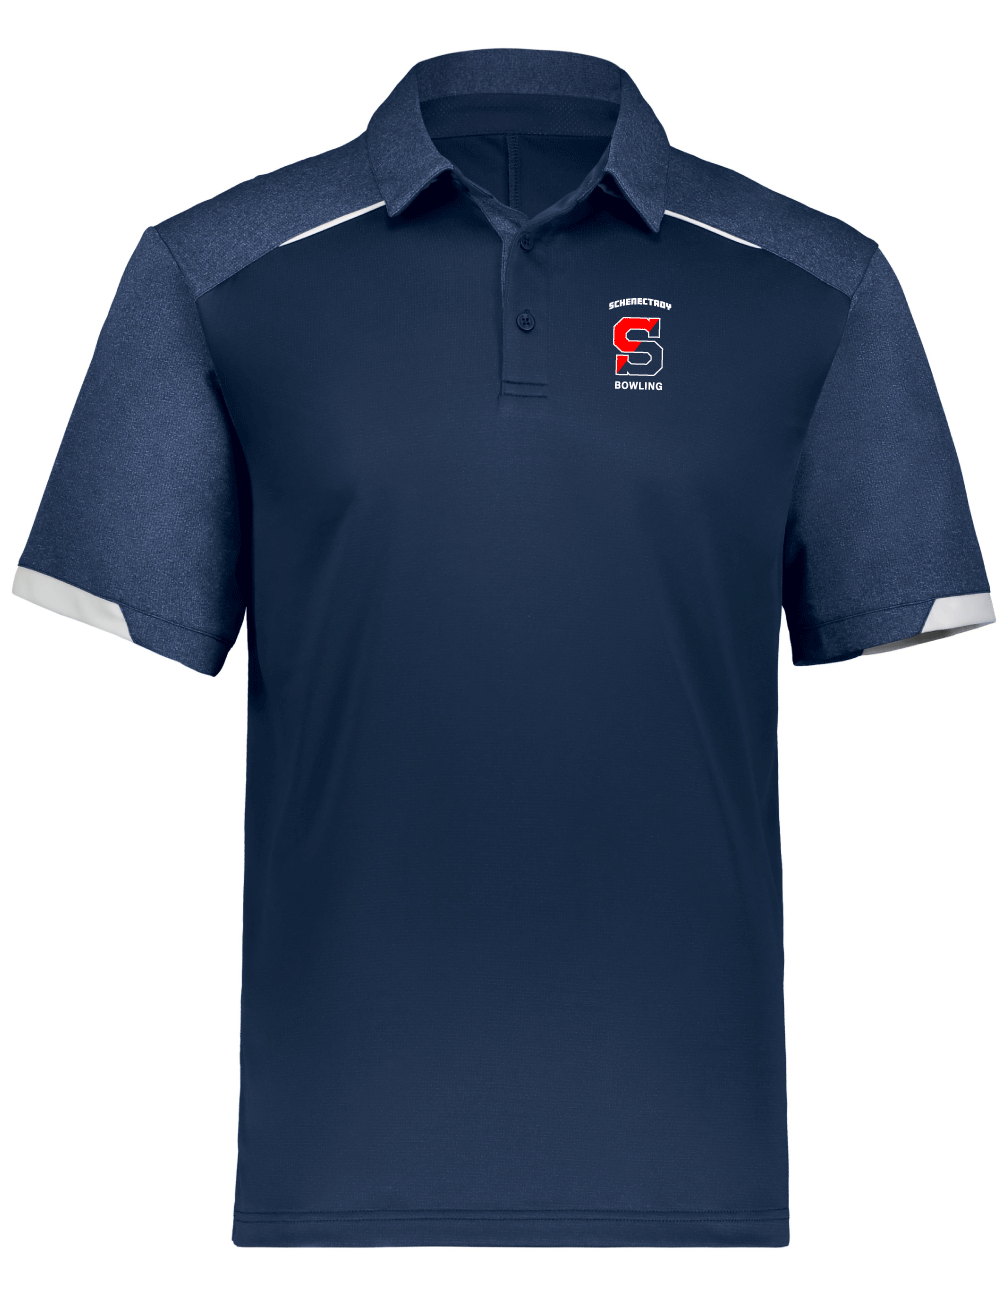 Schenectady bowling polo shirt by Russell